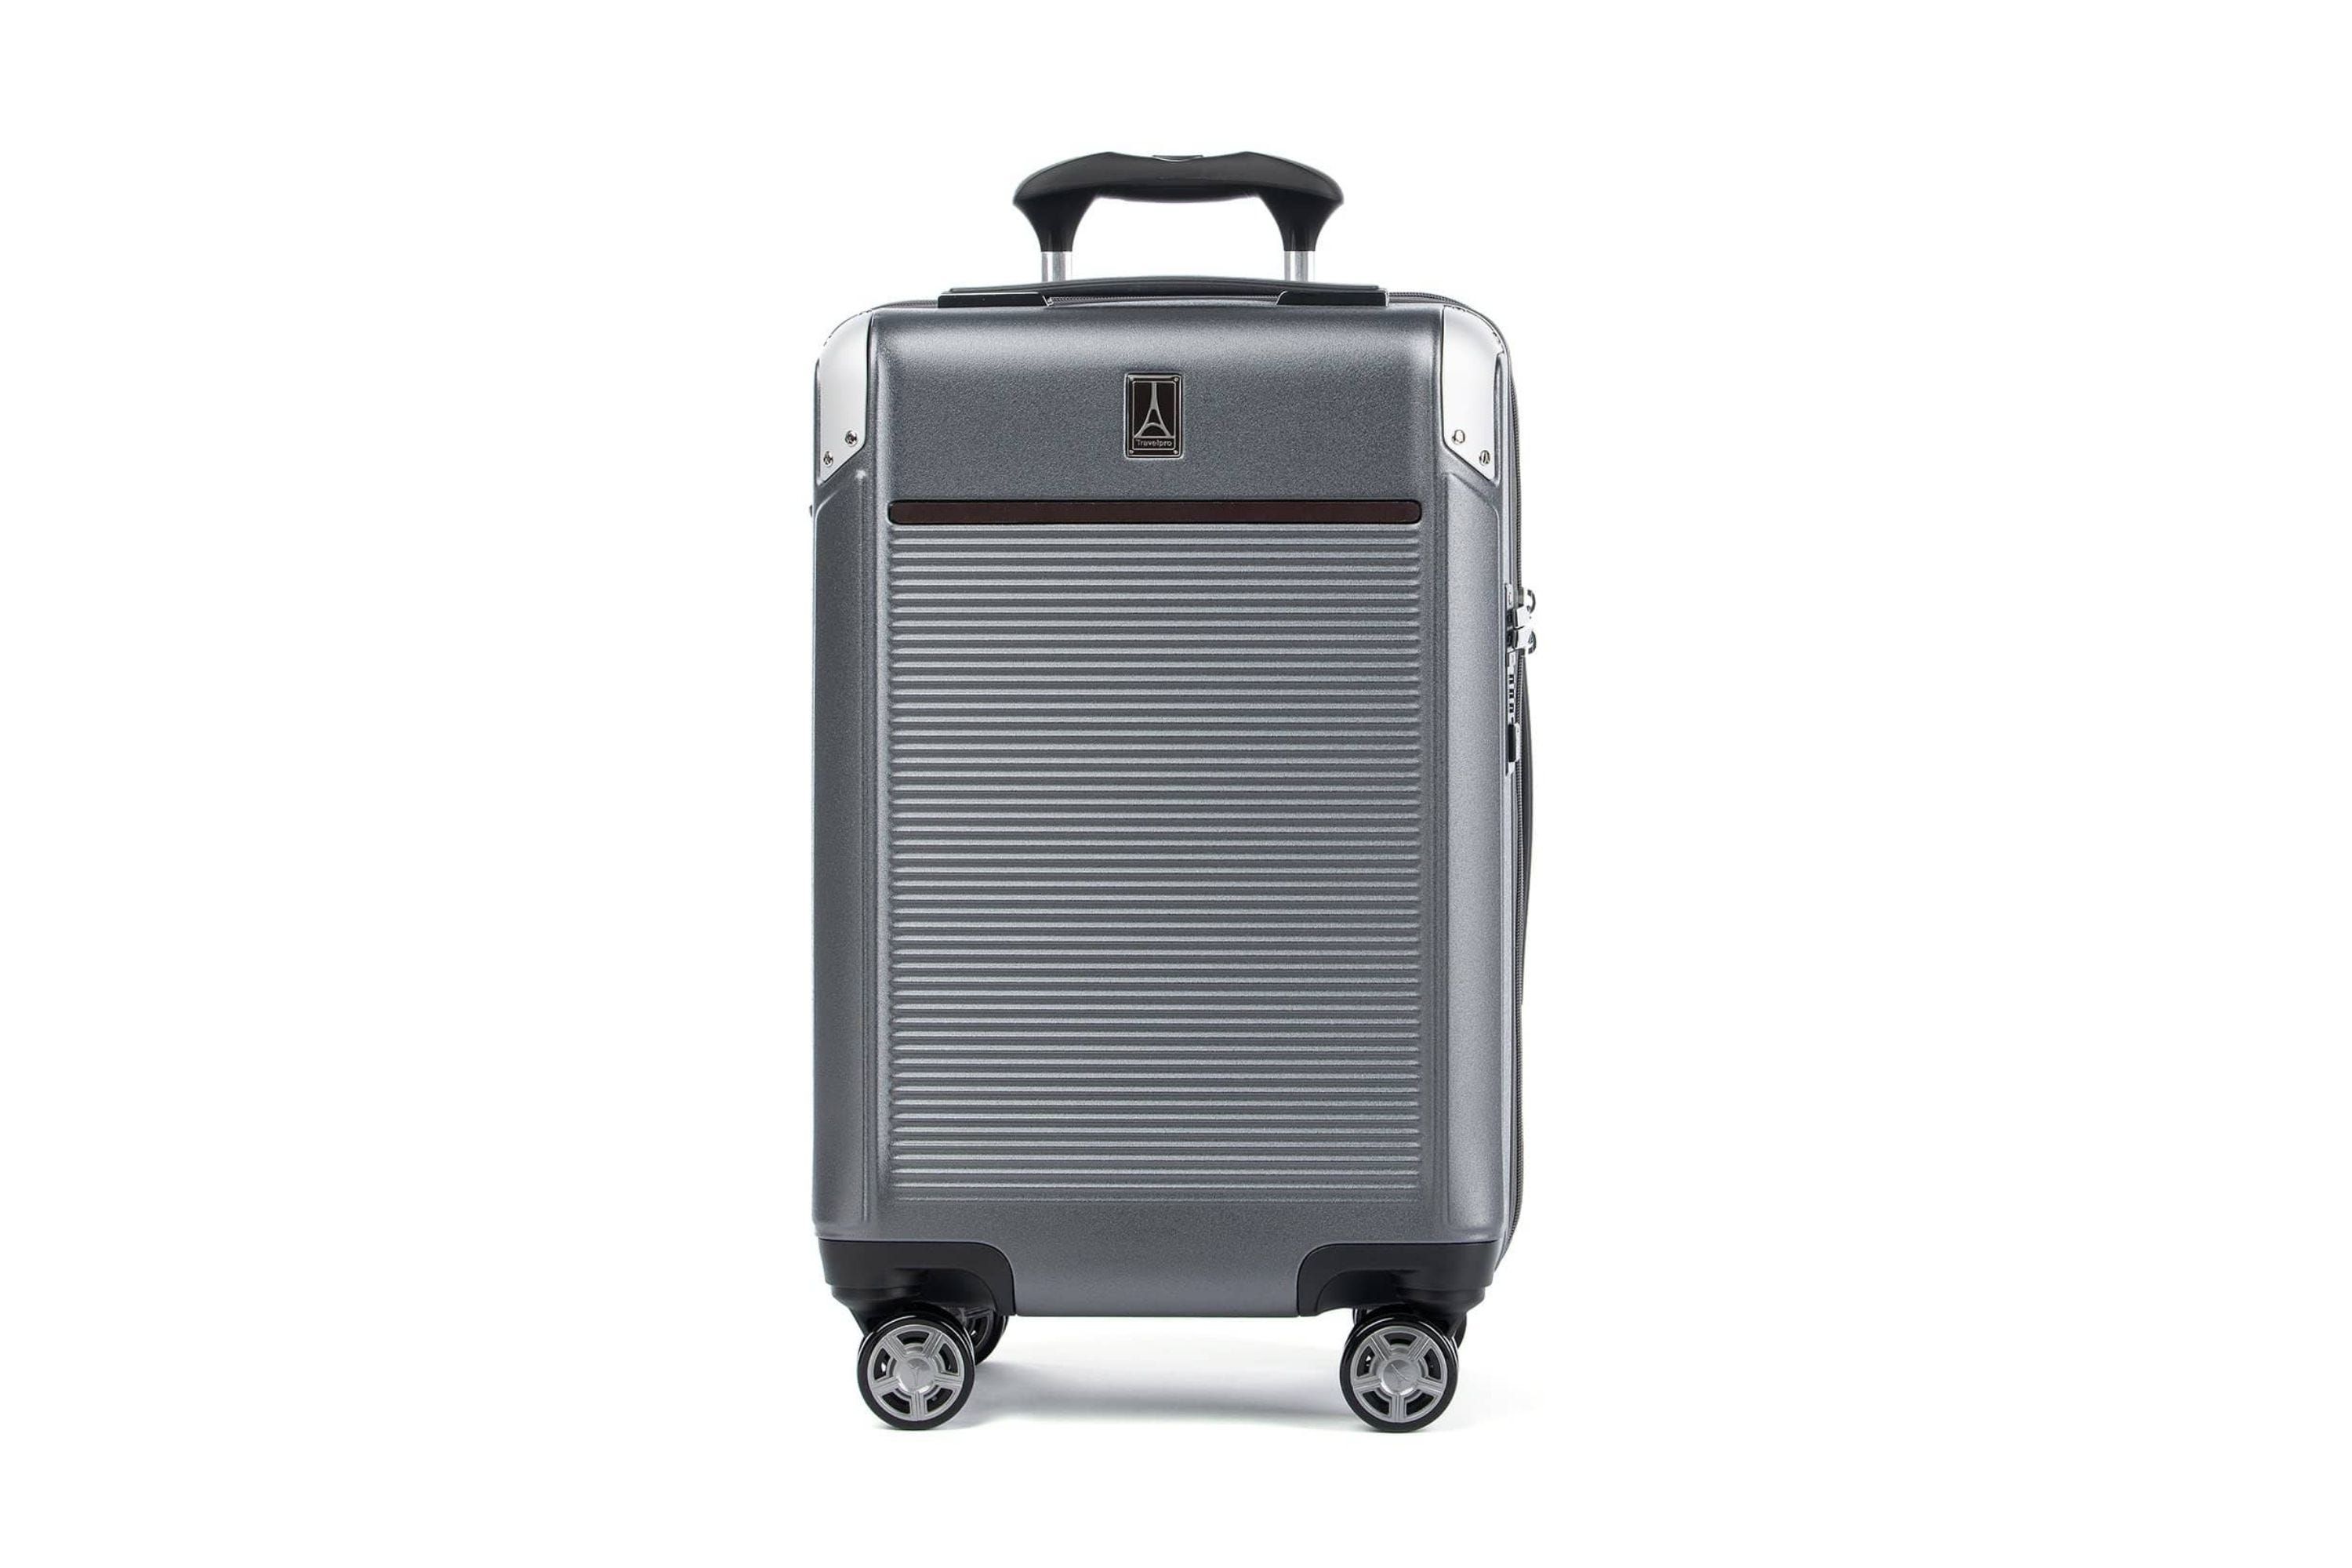 NCAA Two-Tone Premium Carry-On Hardcase Luggage Spinner 